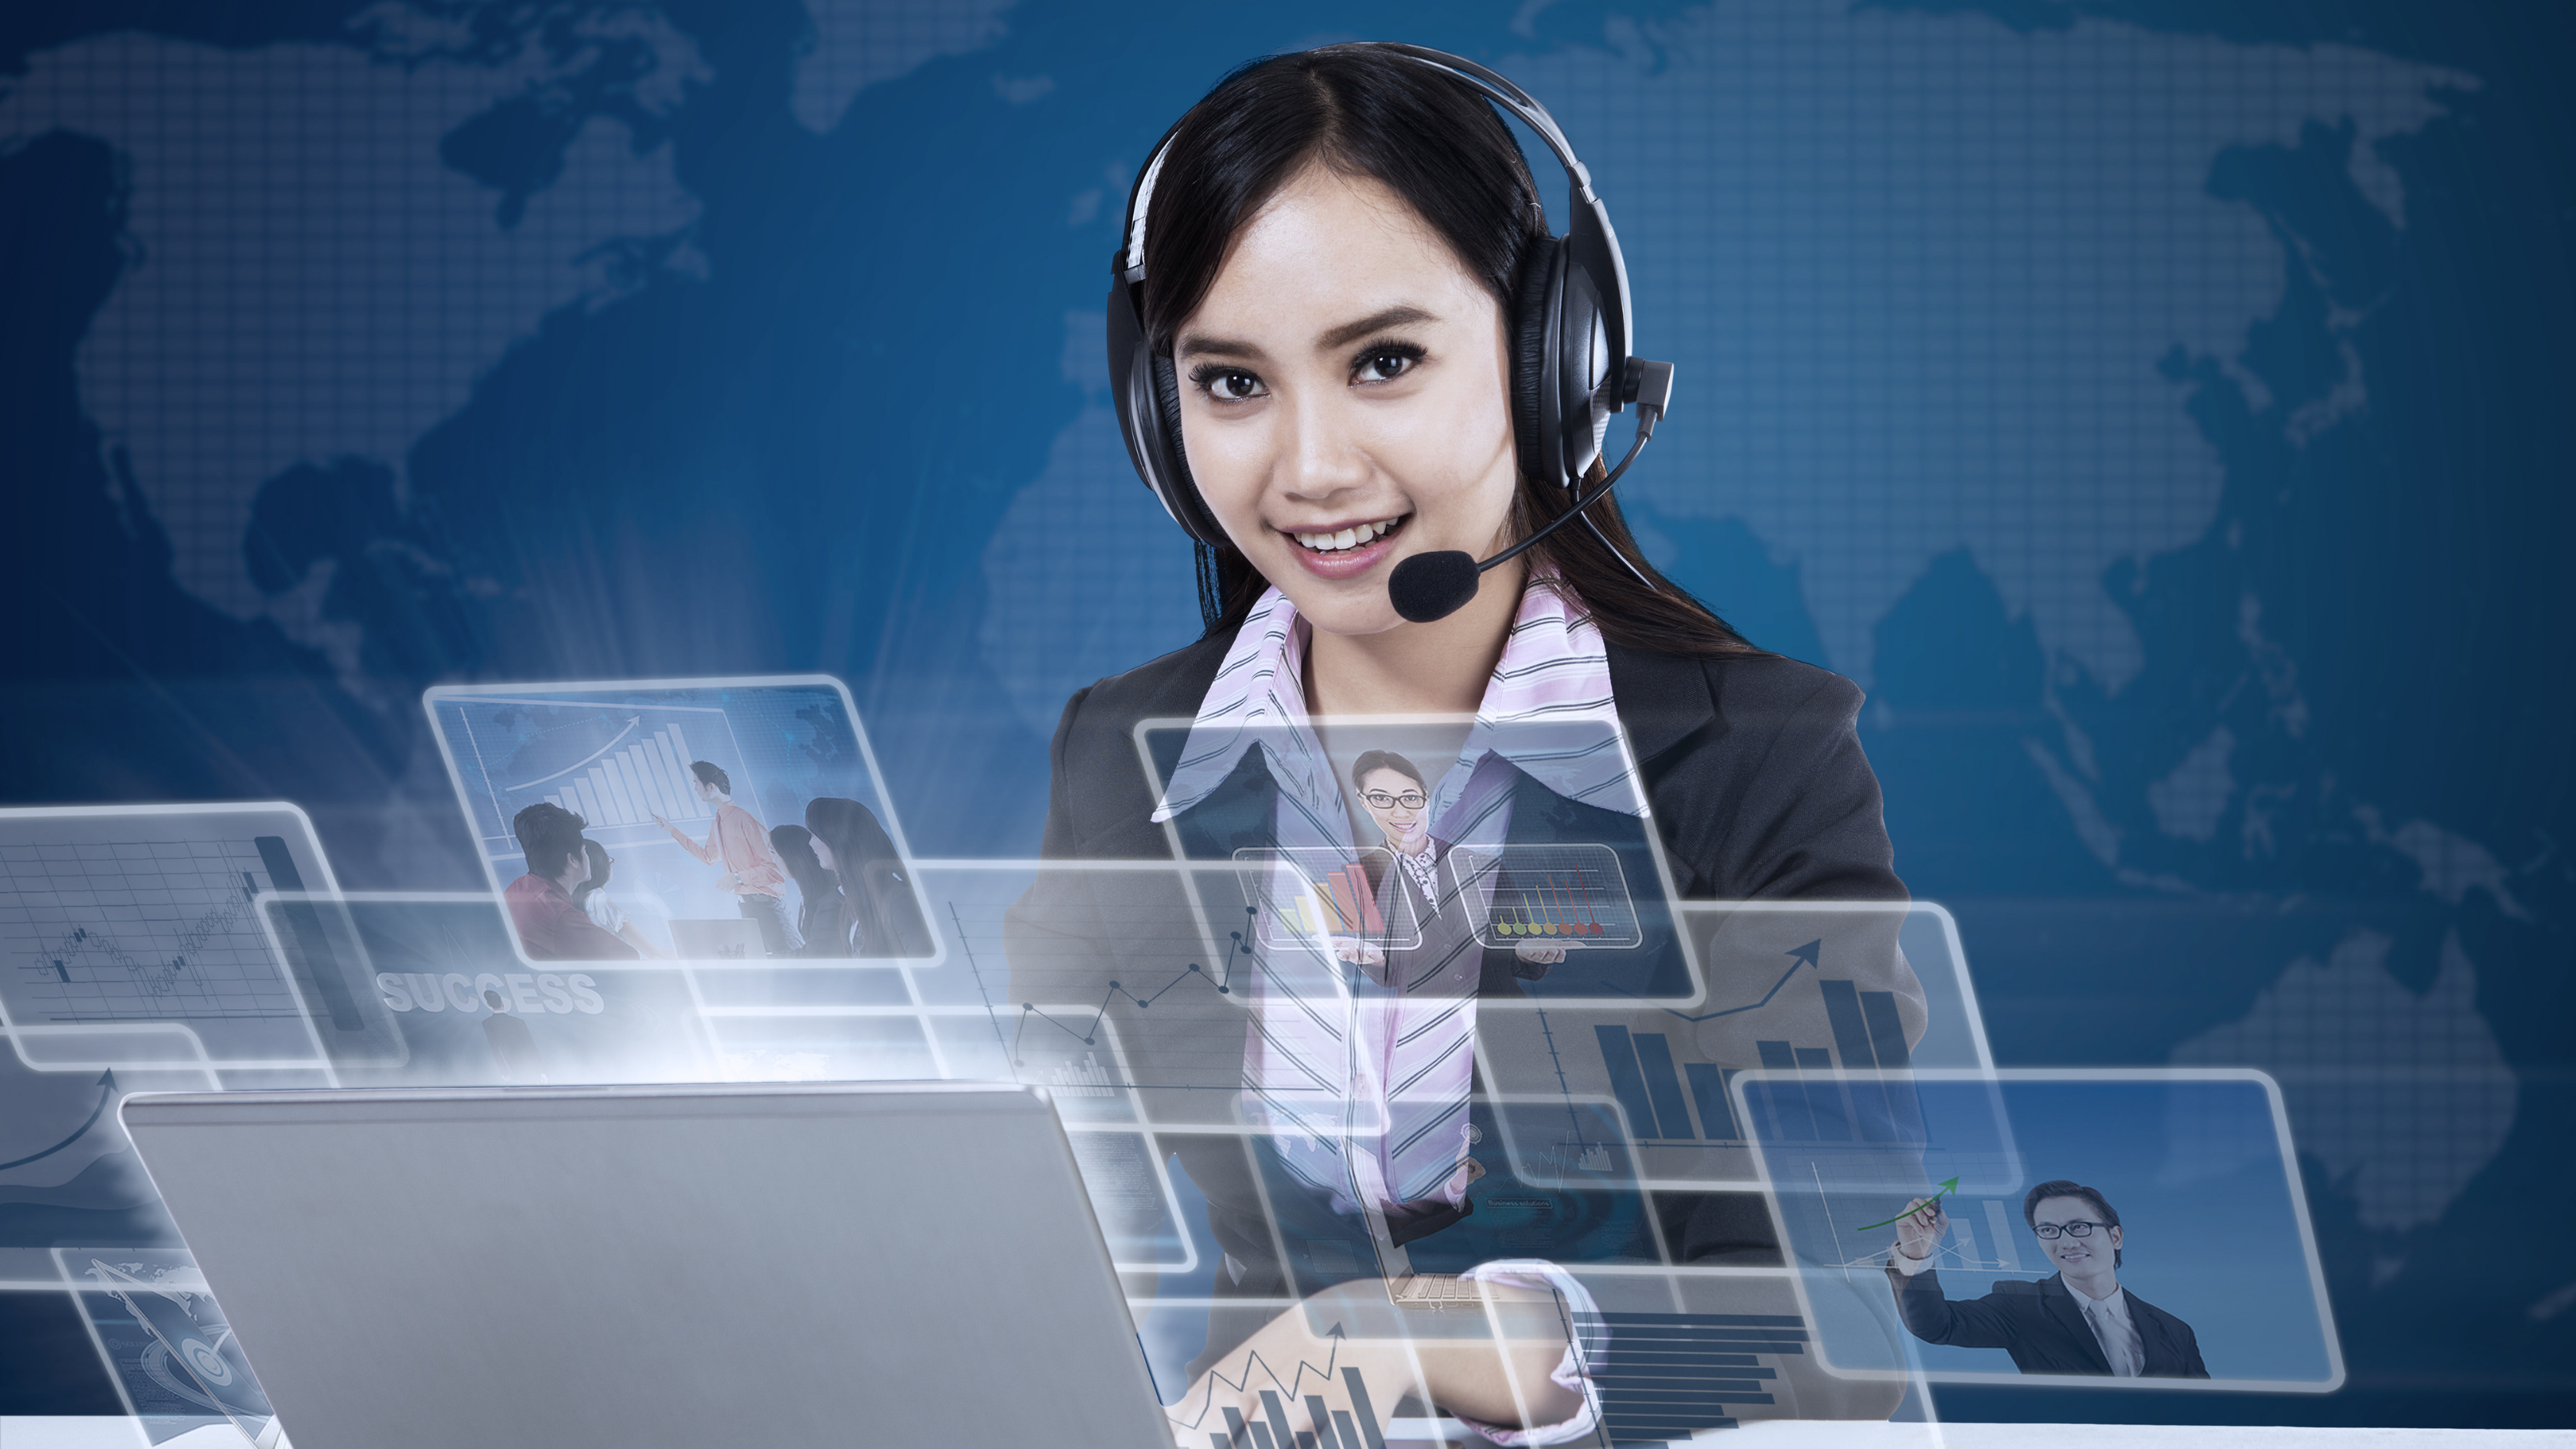 What Are the Benefits of Improved Customer Service?